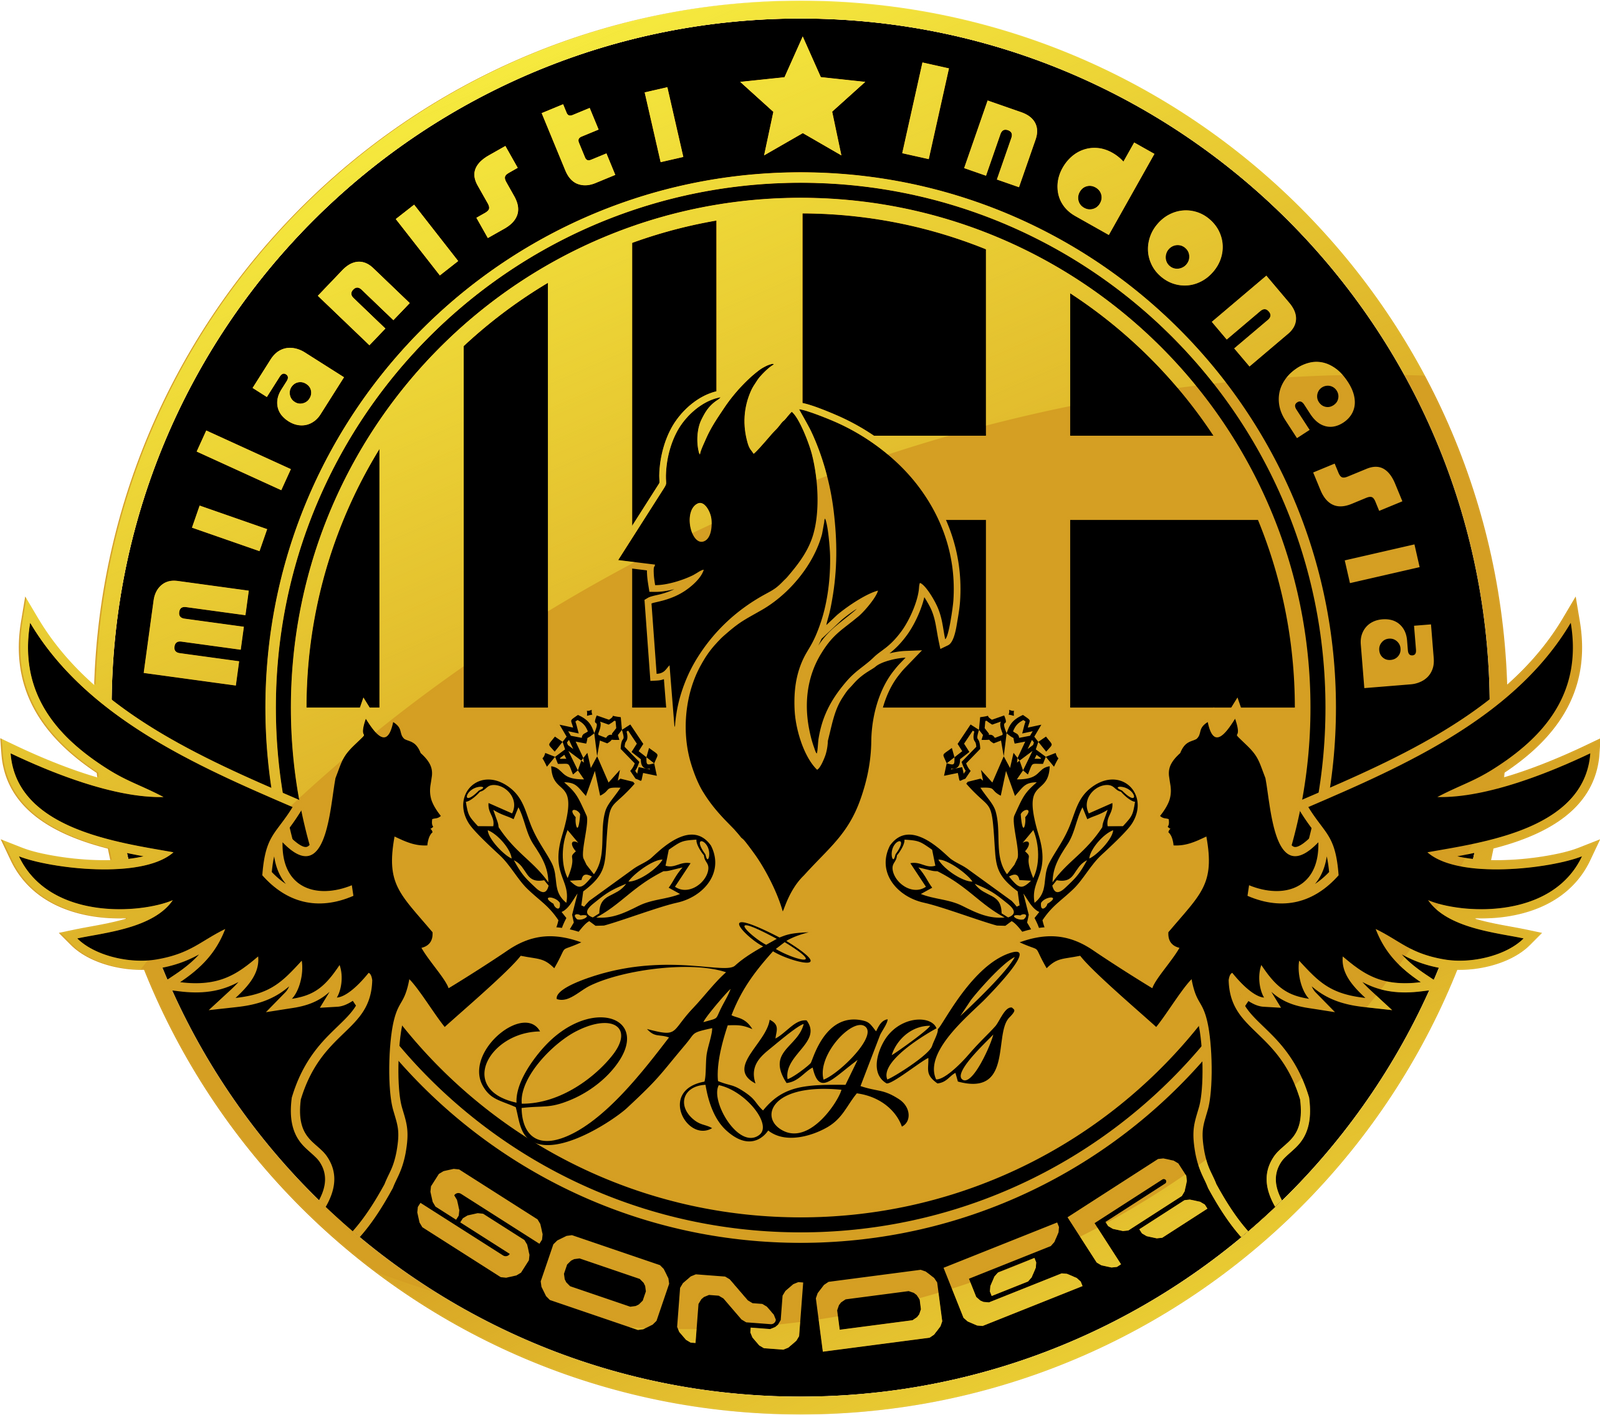 Download this Logo Milanisti Indonesia Angels Sonder picture